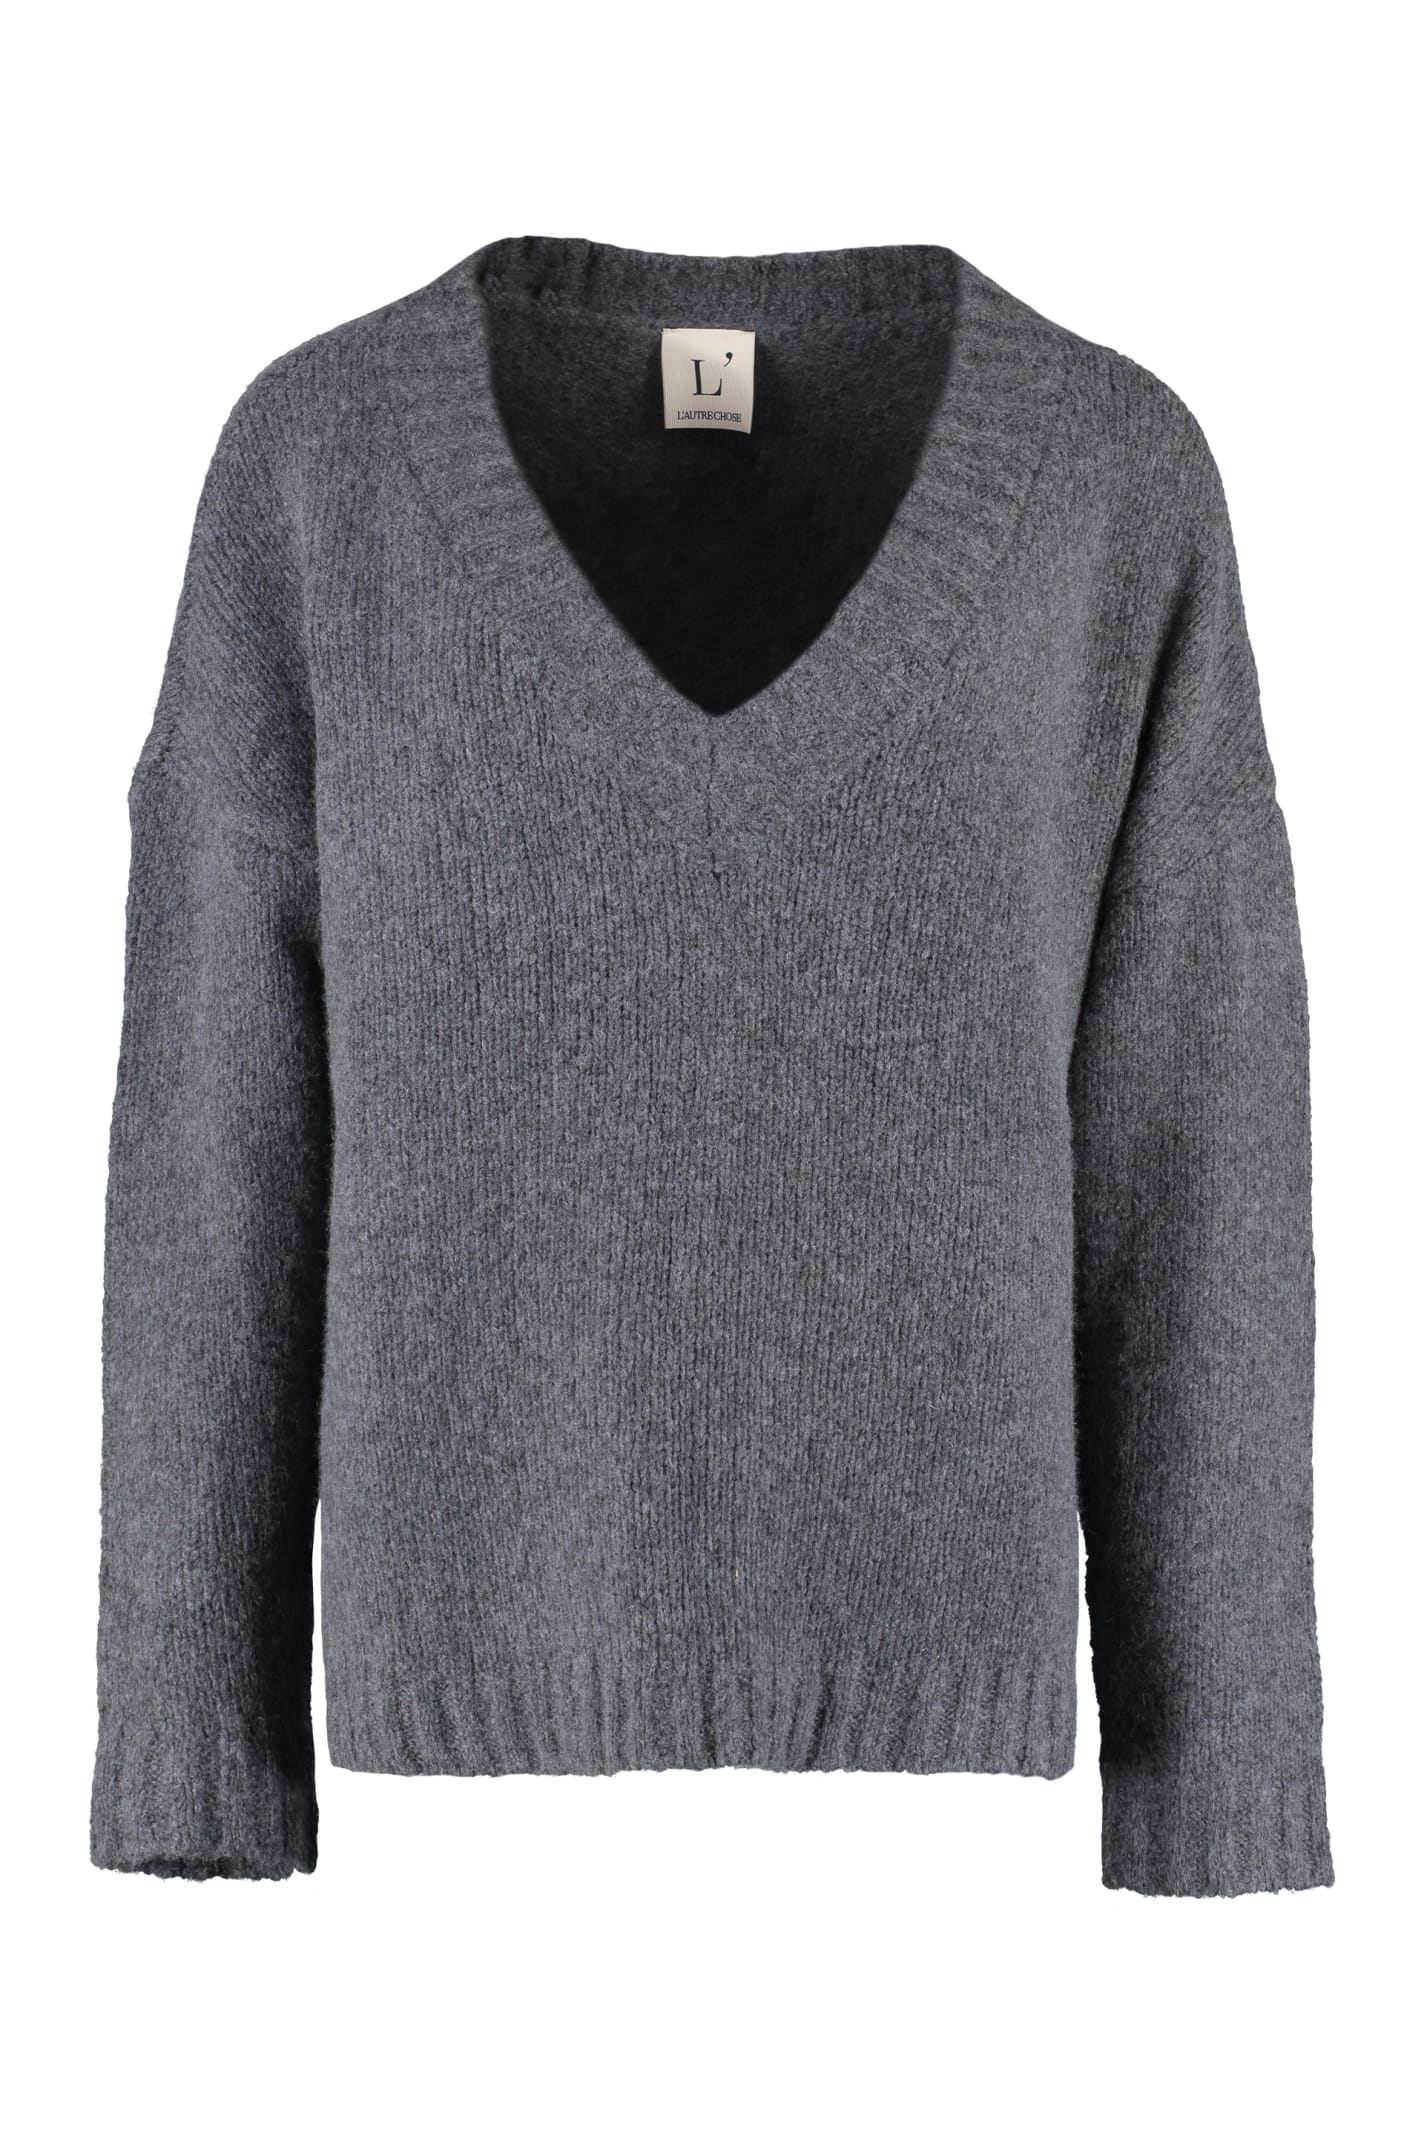 LAutre Chose Wool And Cashmere Sweater